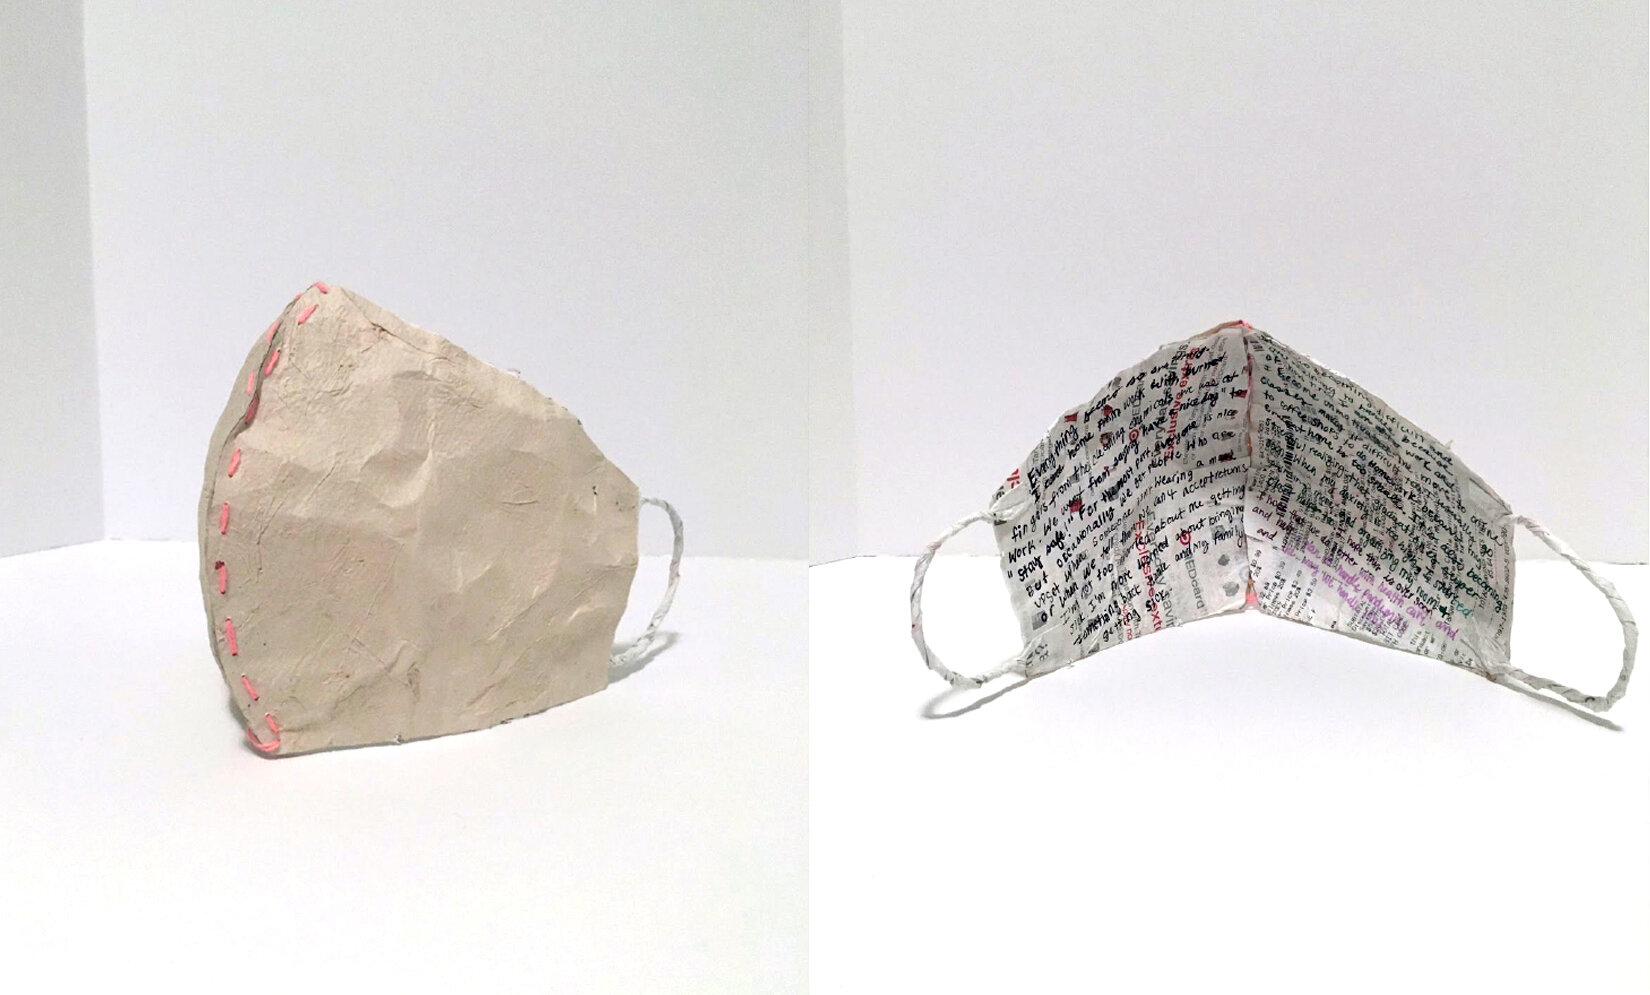  Paper mask, by Rossy Peralta, in response to the Covid-19 pandemic when classes quickly went online Spring 2020. 